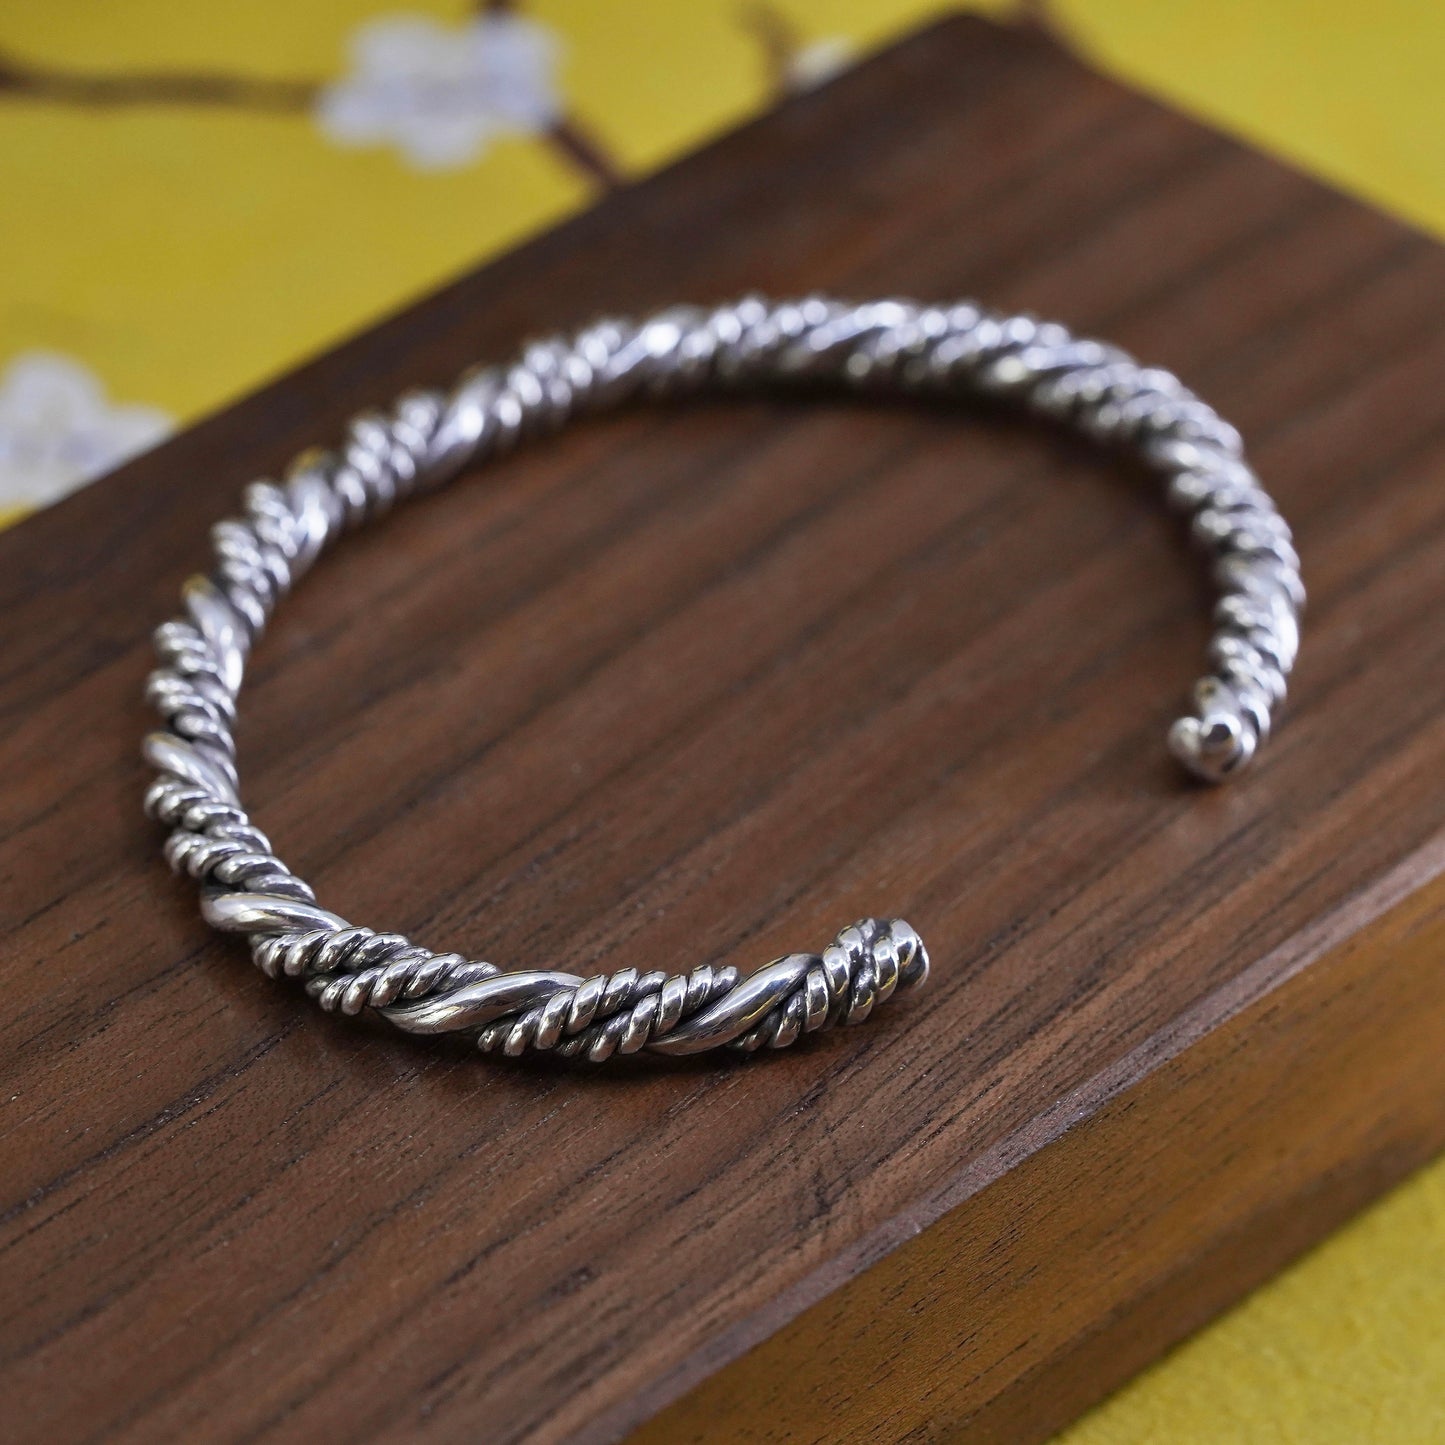 6”, Vintage Sterling silver handmade bracelet, 925 twisted cable cuff